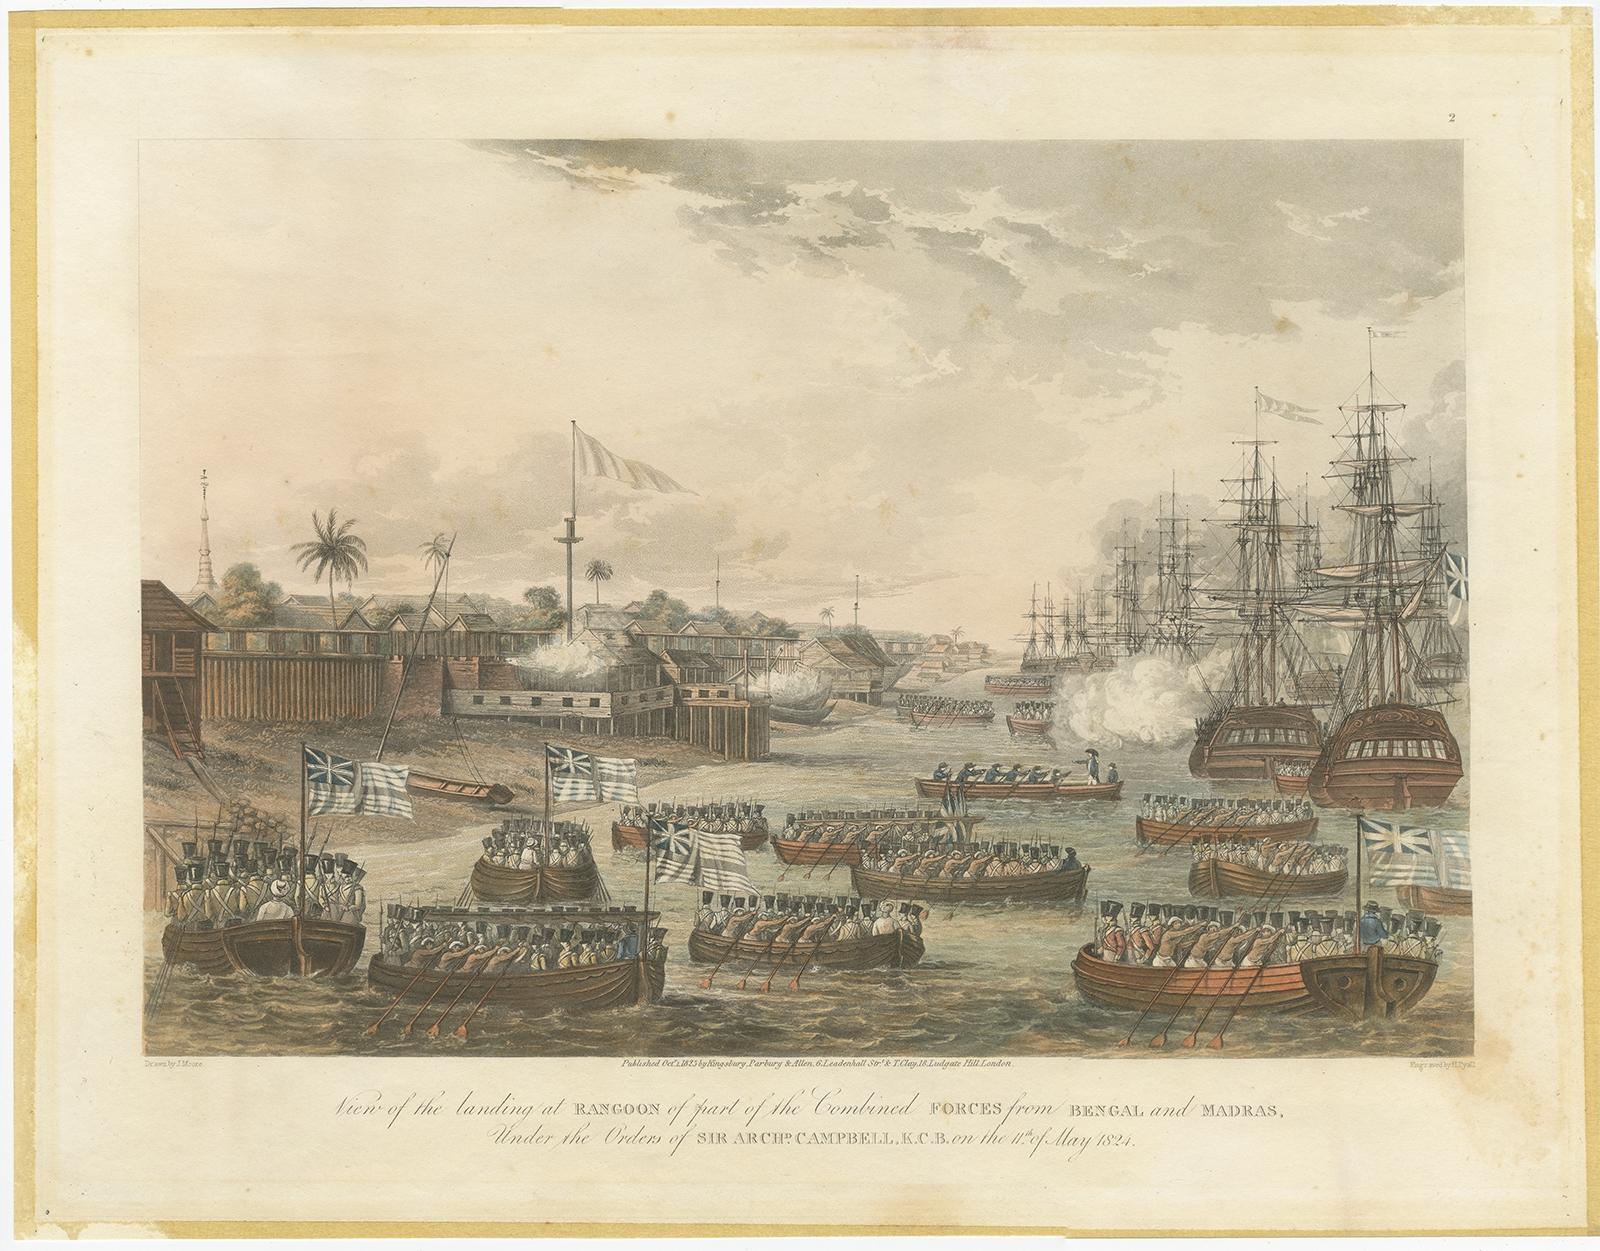 Description: Antique print titled 'View of the landing at Rangoon of part of the Combined Forces from Bengal and Madras, under the Orders of Sir Archd. Campbell K.C.B. on the 11th of May 1824'. 

This print originates from 